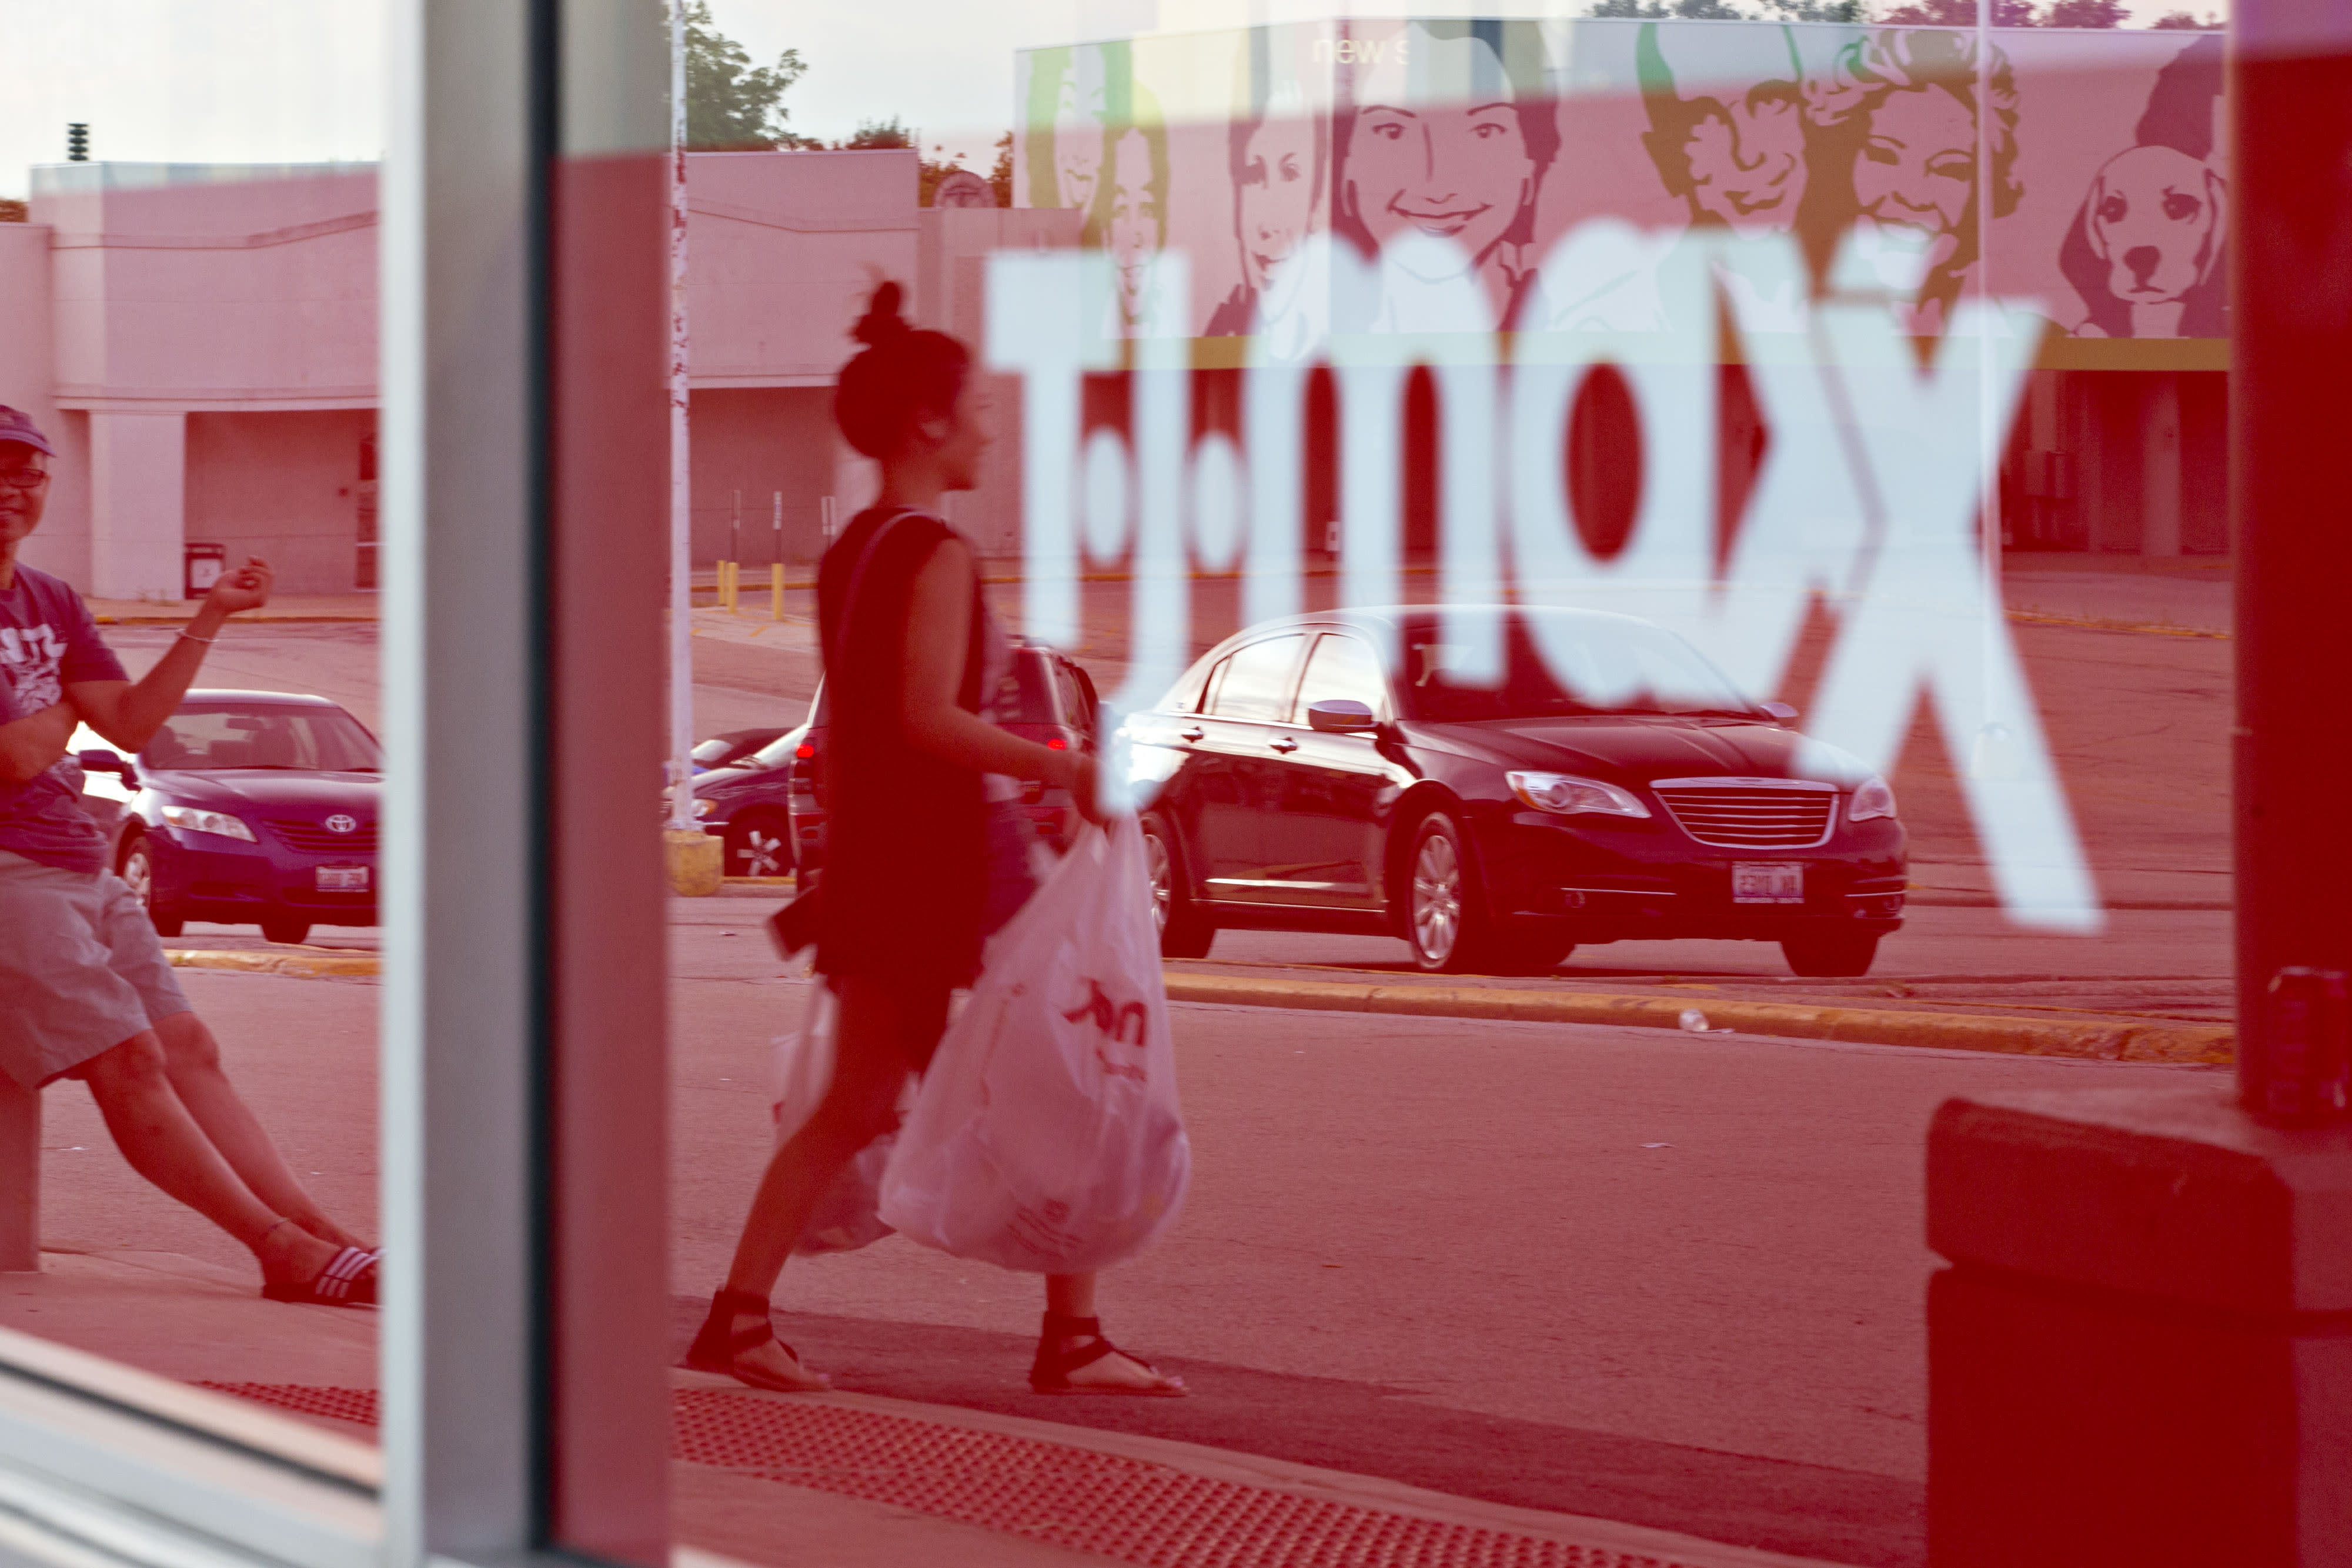 TJX hits an all-time high as reason we own off-price retailer played out in the quarter